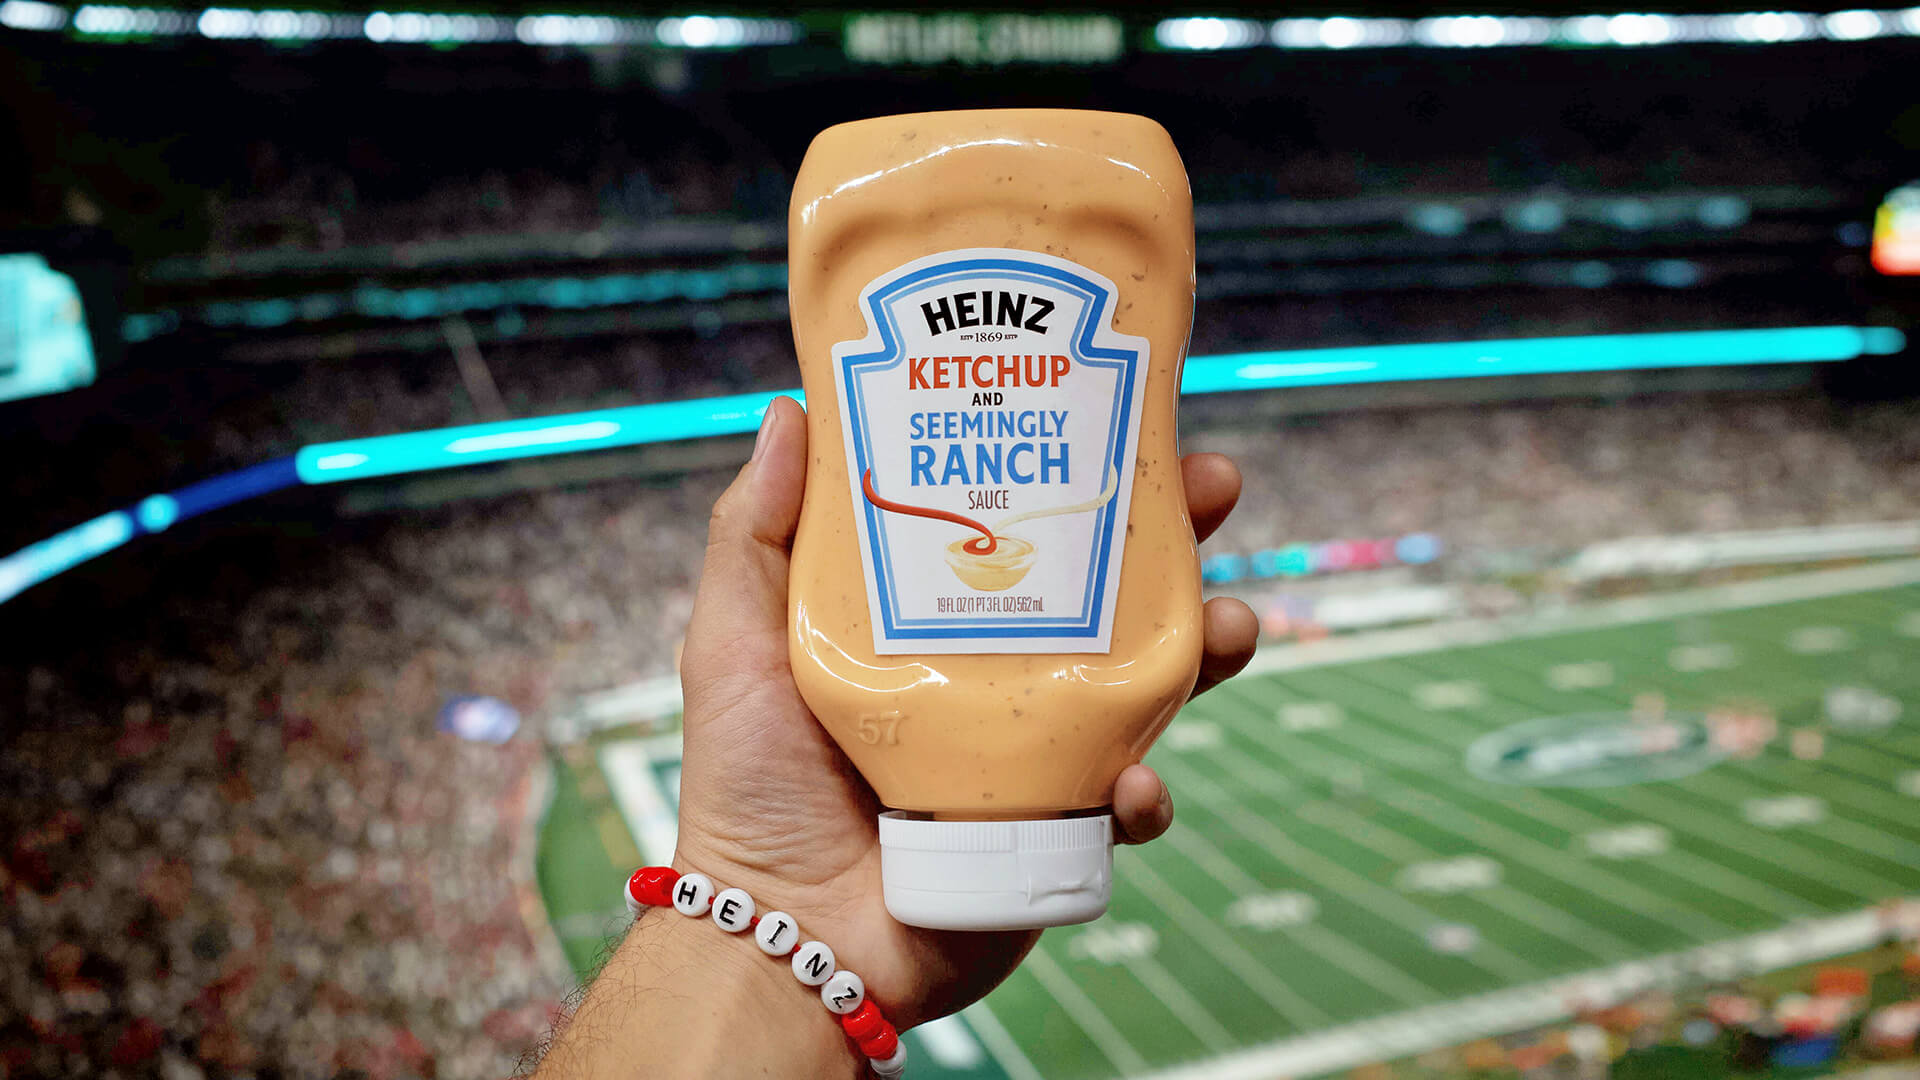 Heinz Ketchup and Seemingly Ranch_Football Game_Taylor Swift_Product